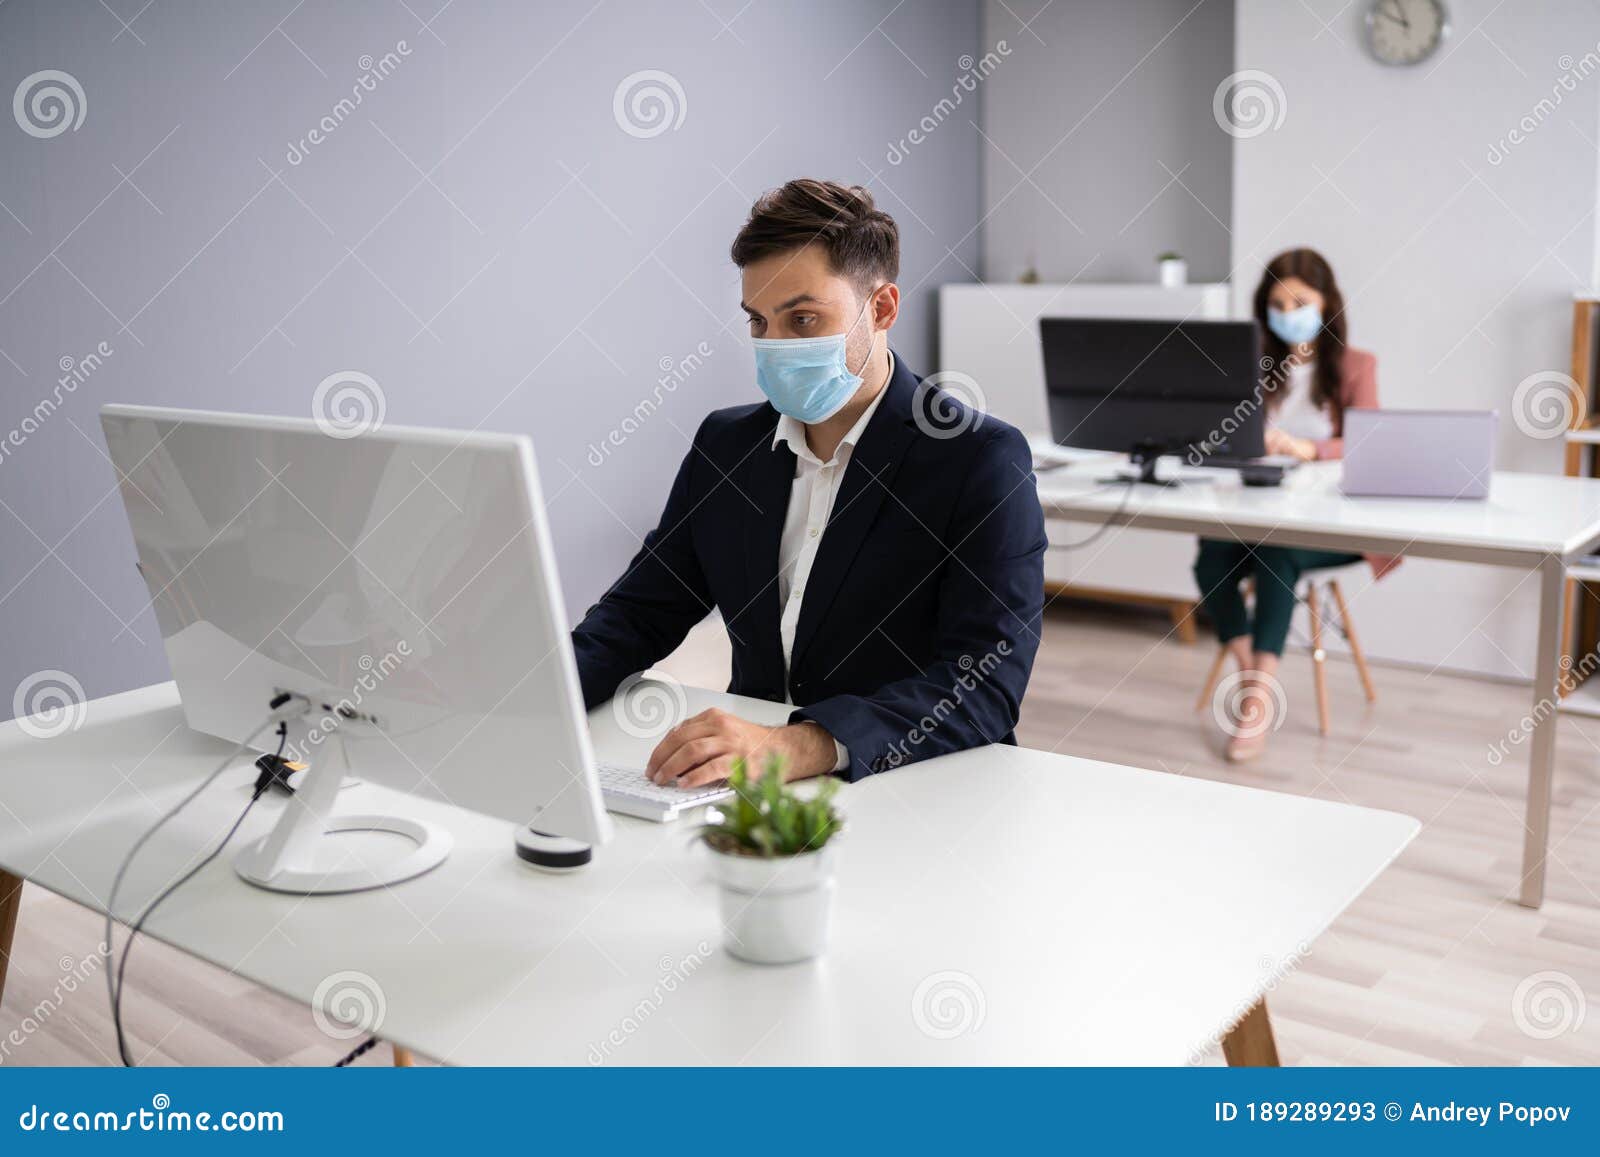 business employees in office wearing medical masks